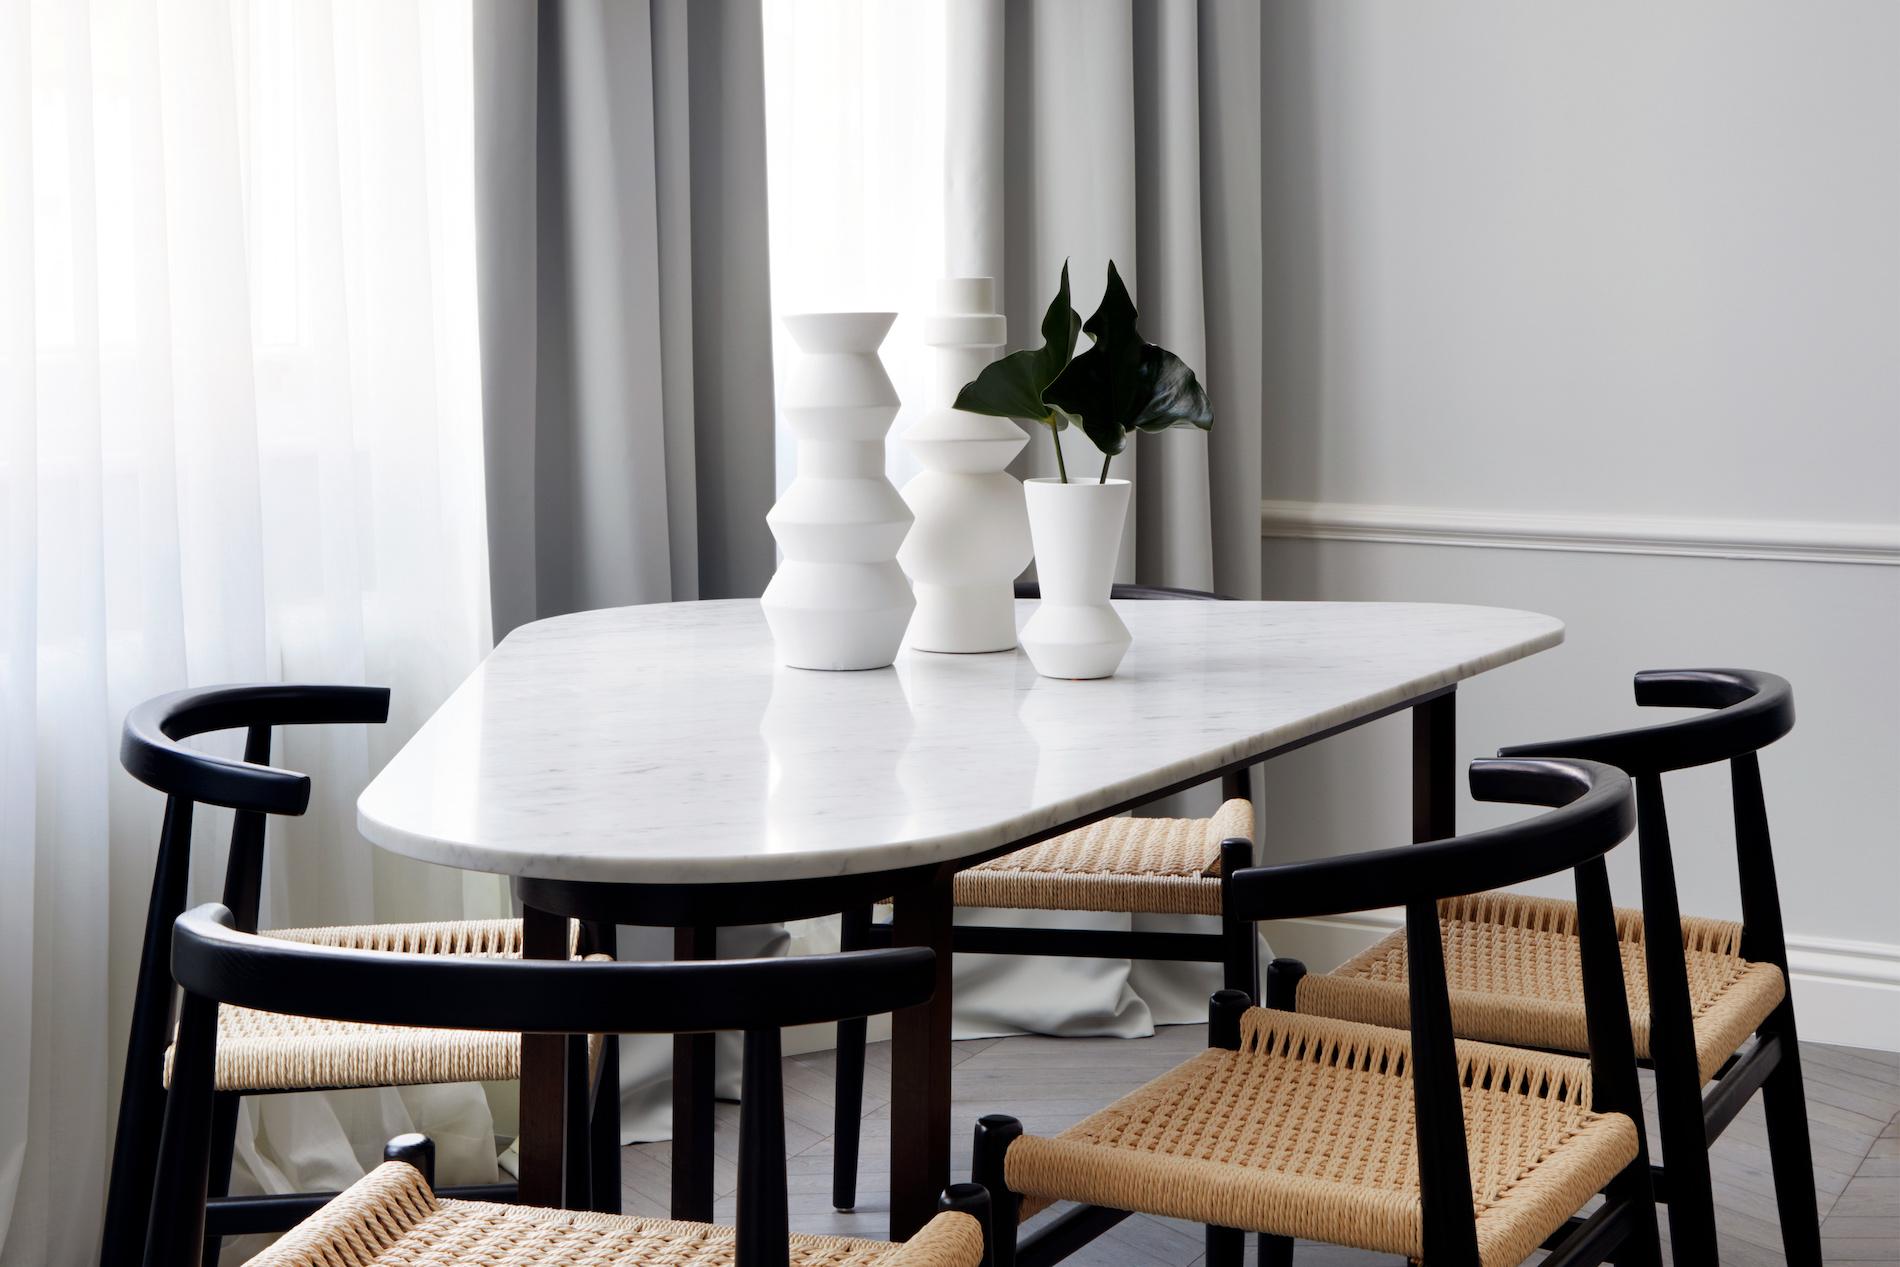 Ethereal Shades Meet Bespoke Details in this Chelsea Apartment